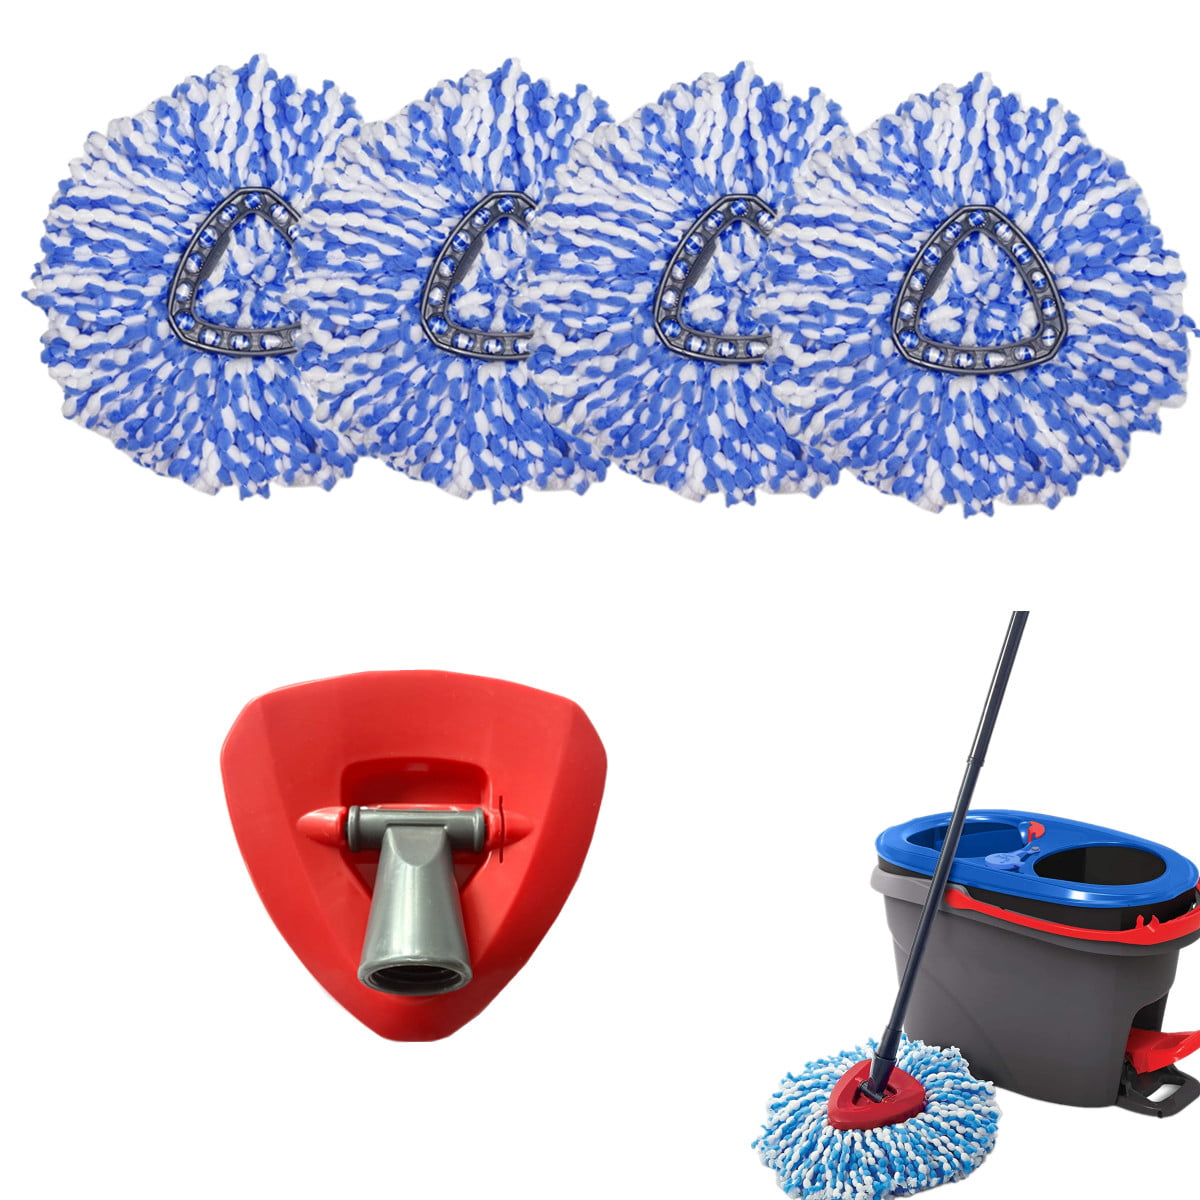 Replacement Mop Heads Vileda Magic 3 Action Refill Sponge Blue 2 Pack New Mops 